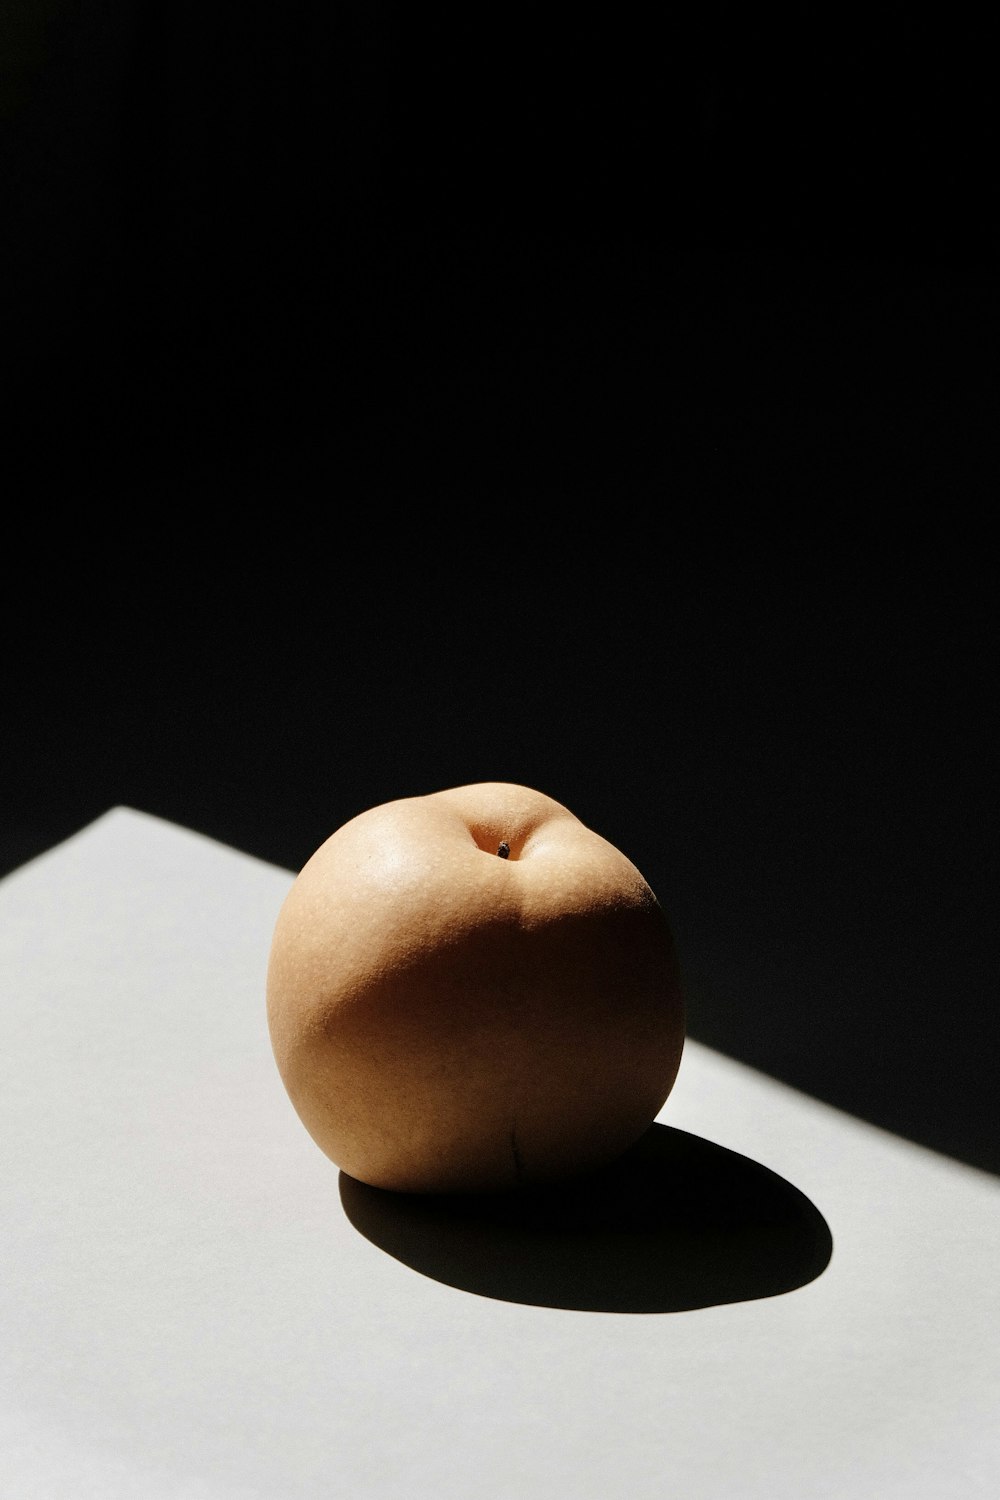 brown apple fruit on white table